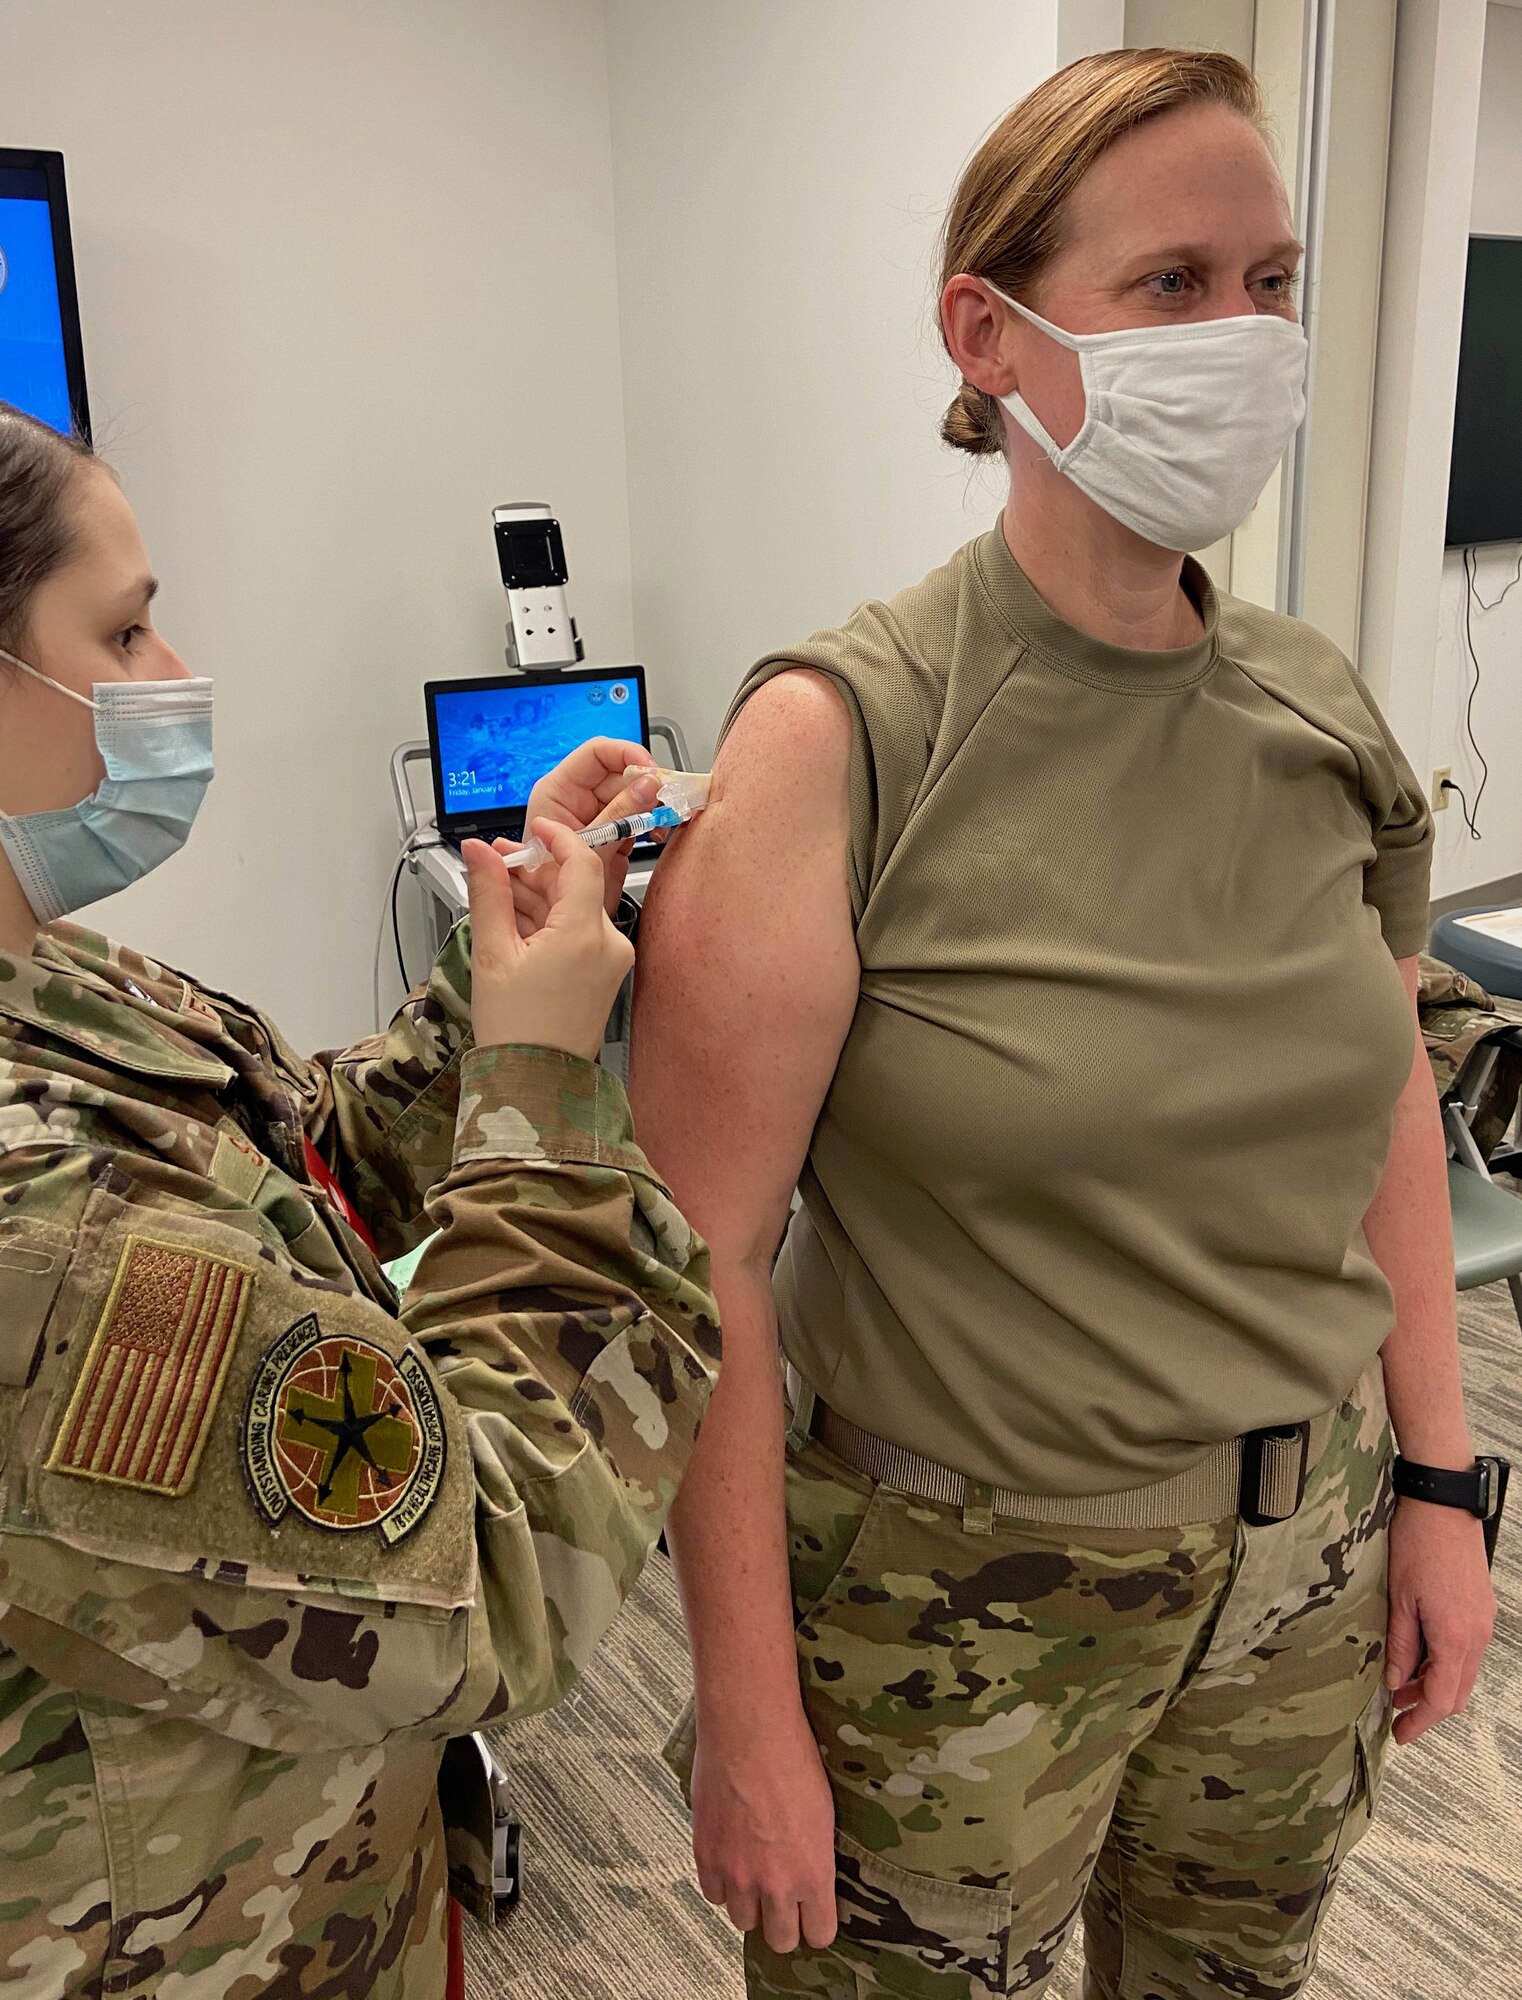 U.S. Air Force Col. Cherly Deloughery, Deputy Chief of Civil Engineer Division for Air Force Reserve Command, is given her second dose of COVID-19 vaccine at the 78th Medical Group, Robins Air Force Base, GA., Feb. 5, 2021. AFRC leaders have now completed their required two doses of the COVID-19 vaccine. (courtesy photo)